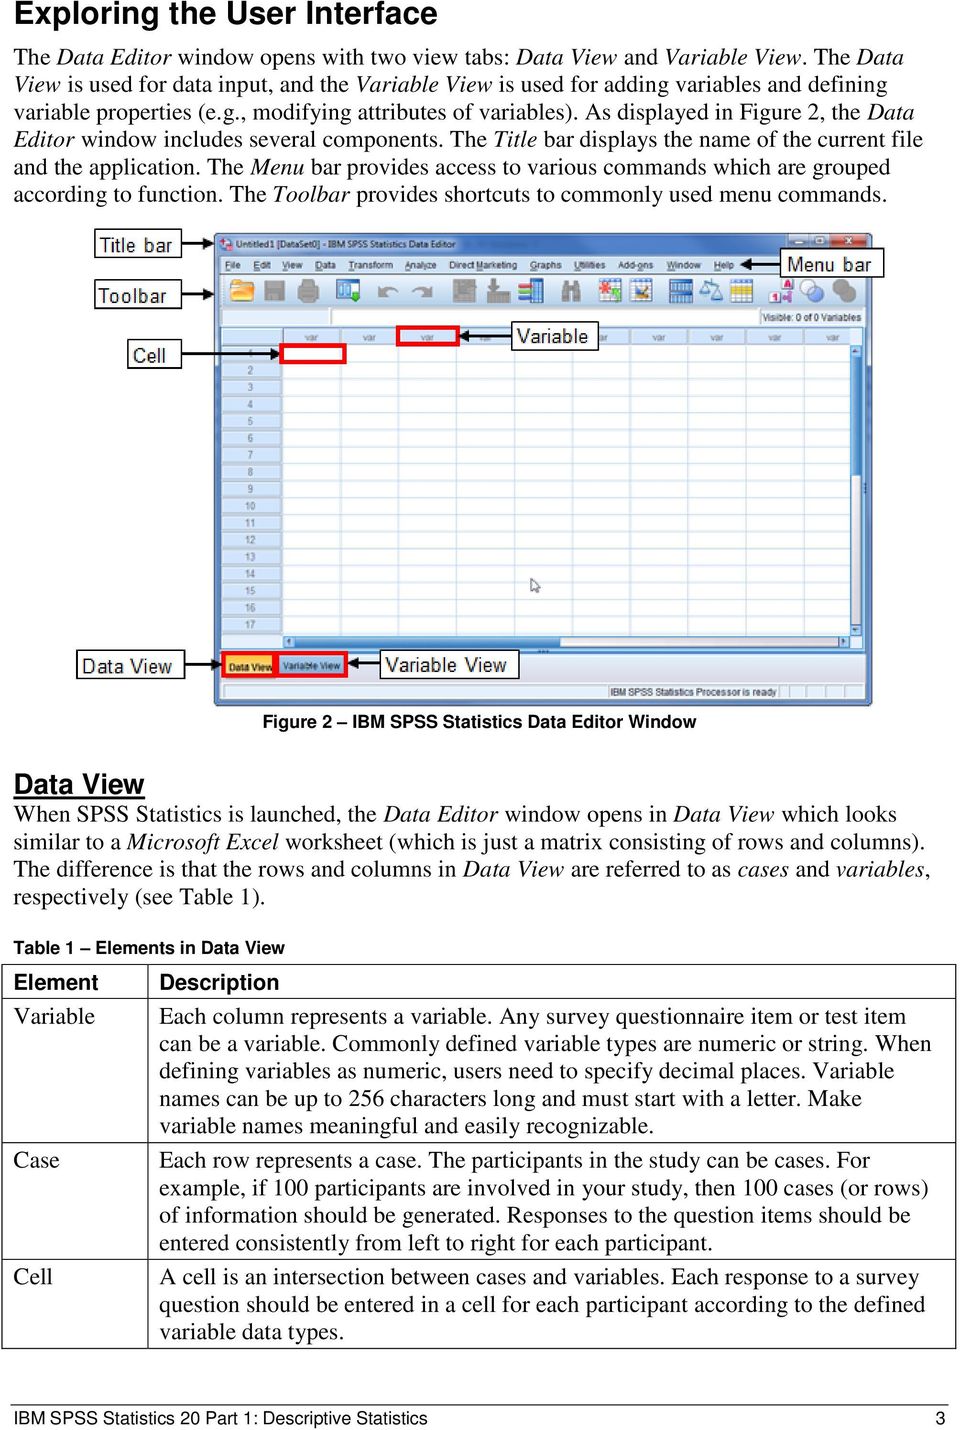 As displayed in Figure 2, the Data Editor window includes several components. The Title bar displays the name of the current file and the application.